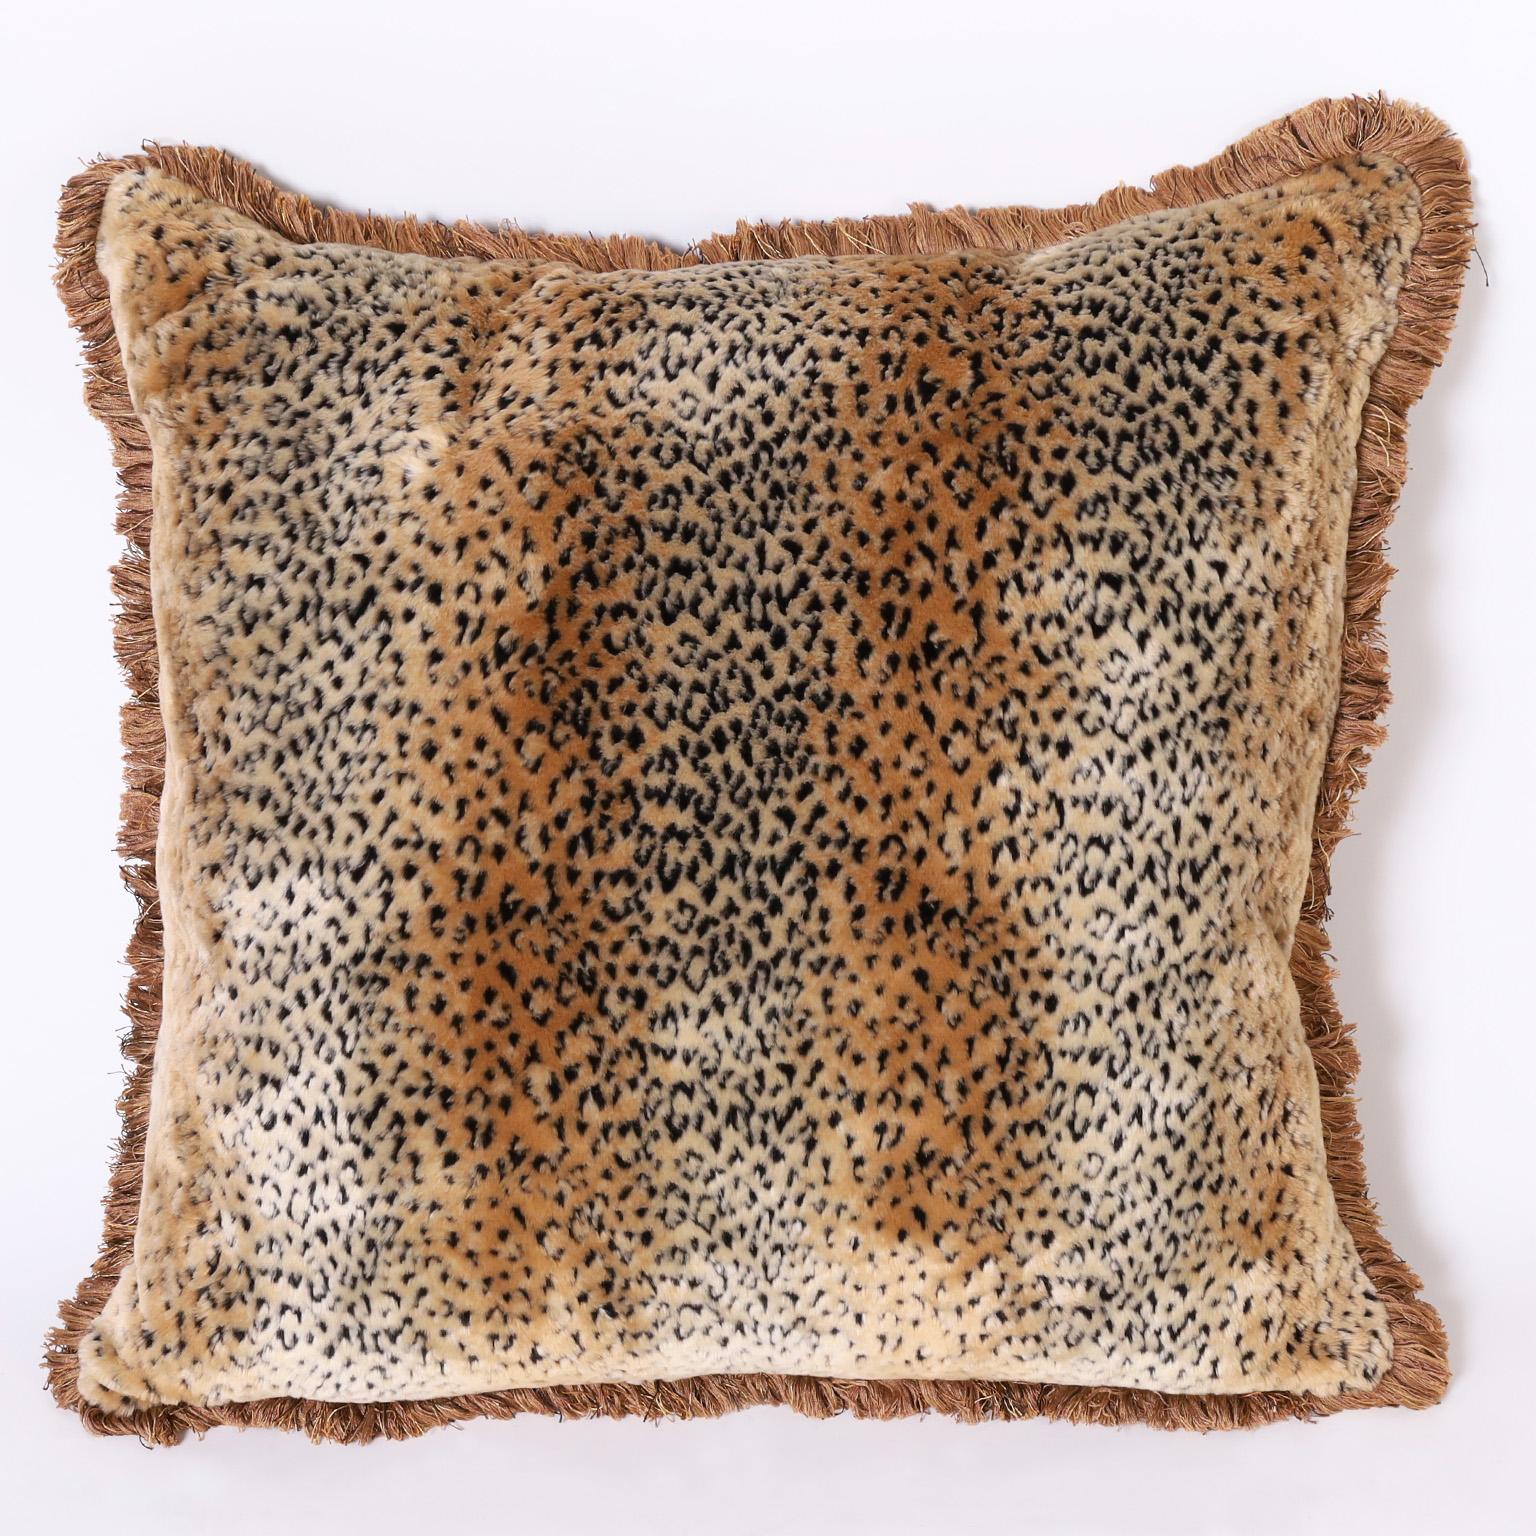 Chic pair of oversize pillows with velveteen leopard print fronts bordered in fringe and with cotton backs. Priced individually.